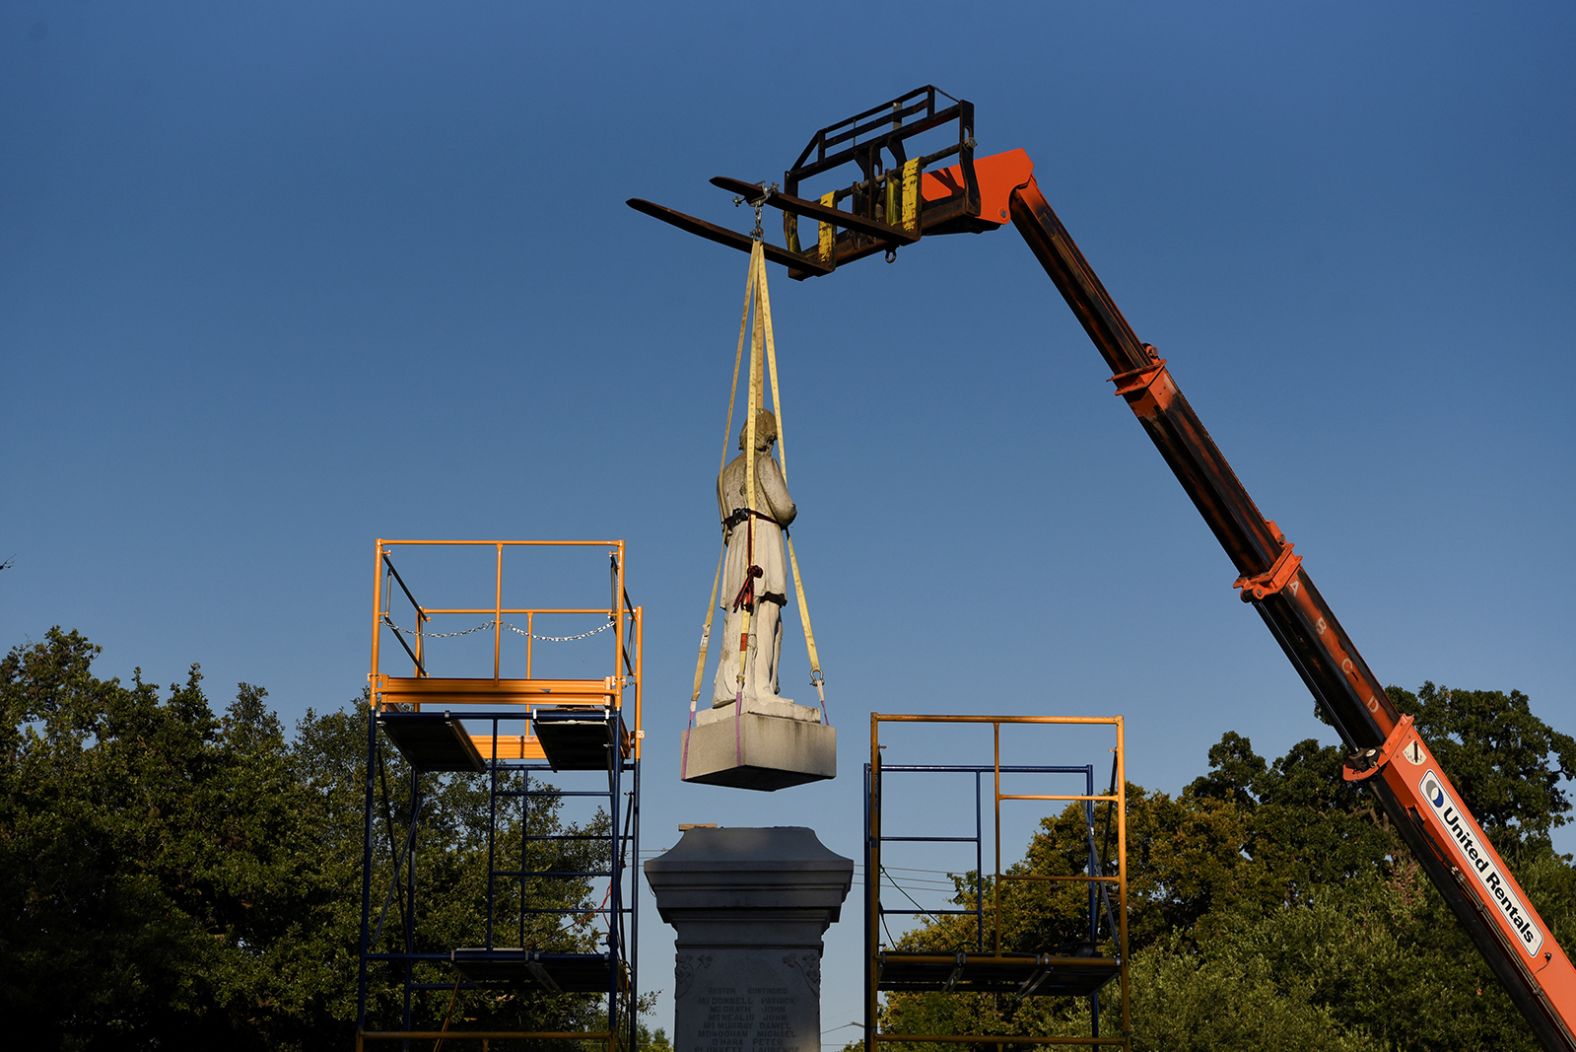 A statue of Confederate Maj. Richard W. Dowling is removed in Houston on June 17. <a href="index.php?page=&url=https%3A%2F%2Fwww.cnn.com%2F2020%2F06%2F10%2Fus%2Fchristopher-columbus-statues-down-trnd%2Findex.html" target="_blank">Confederate statues are being taken down and tampered with</a> across the United States.